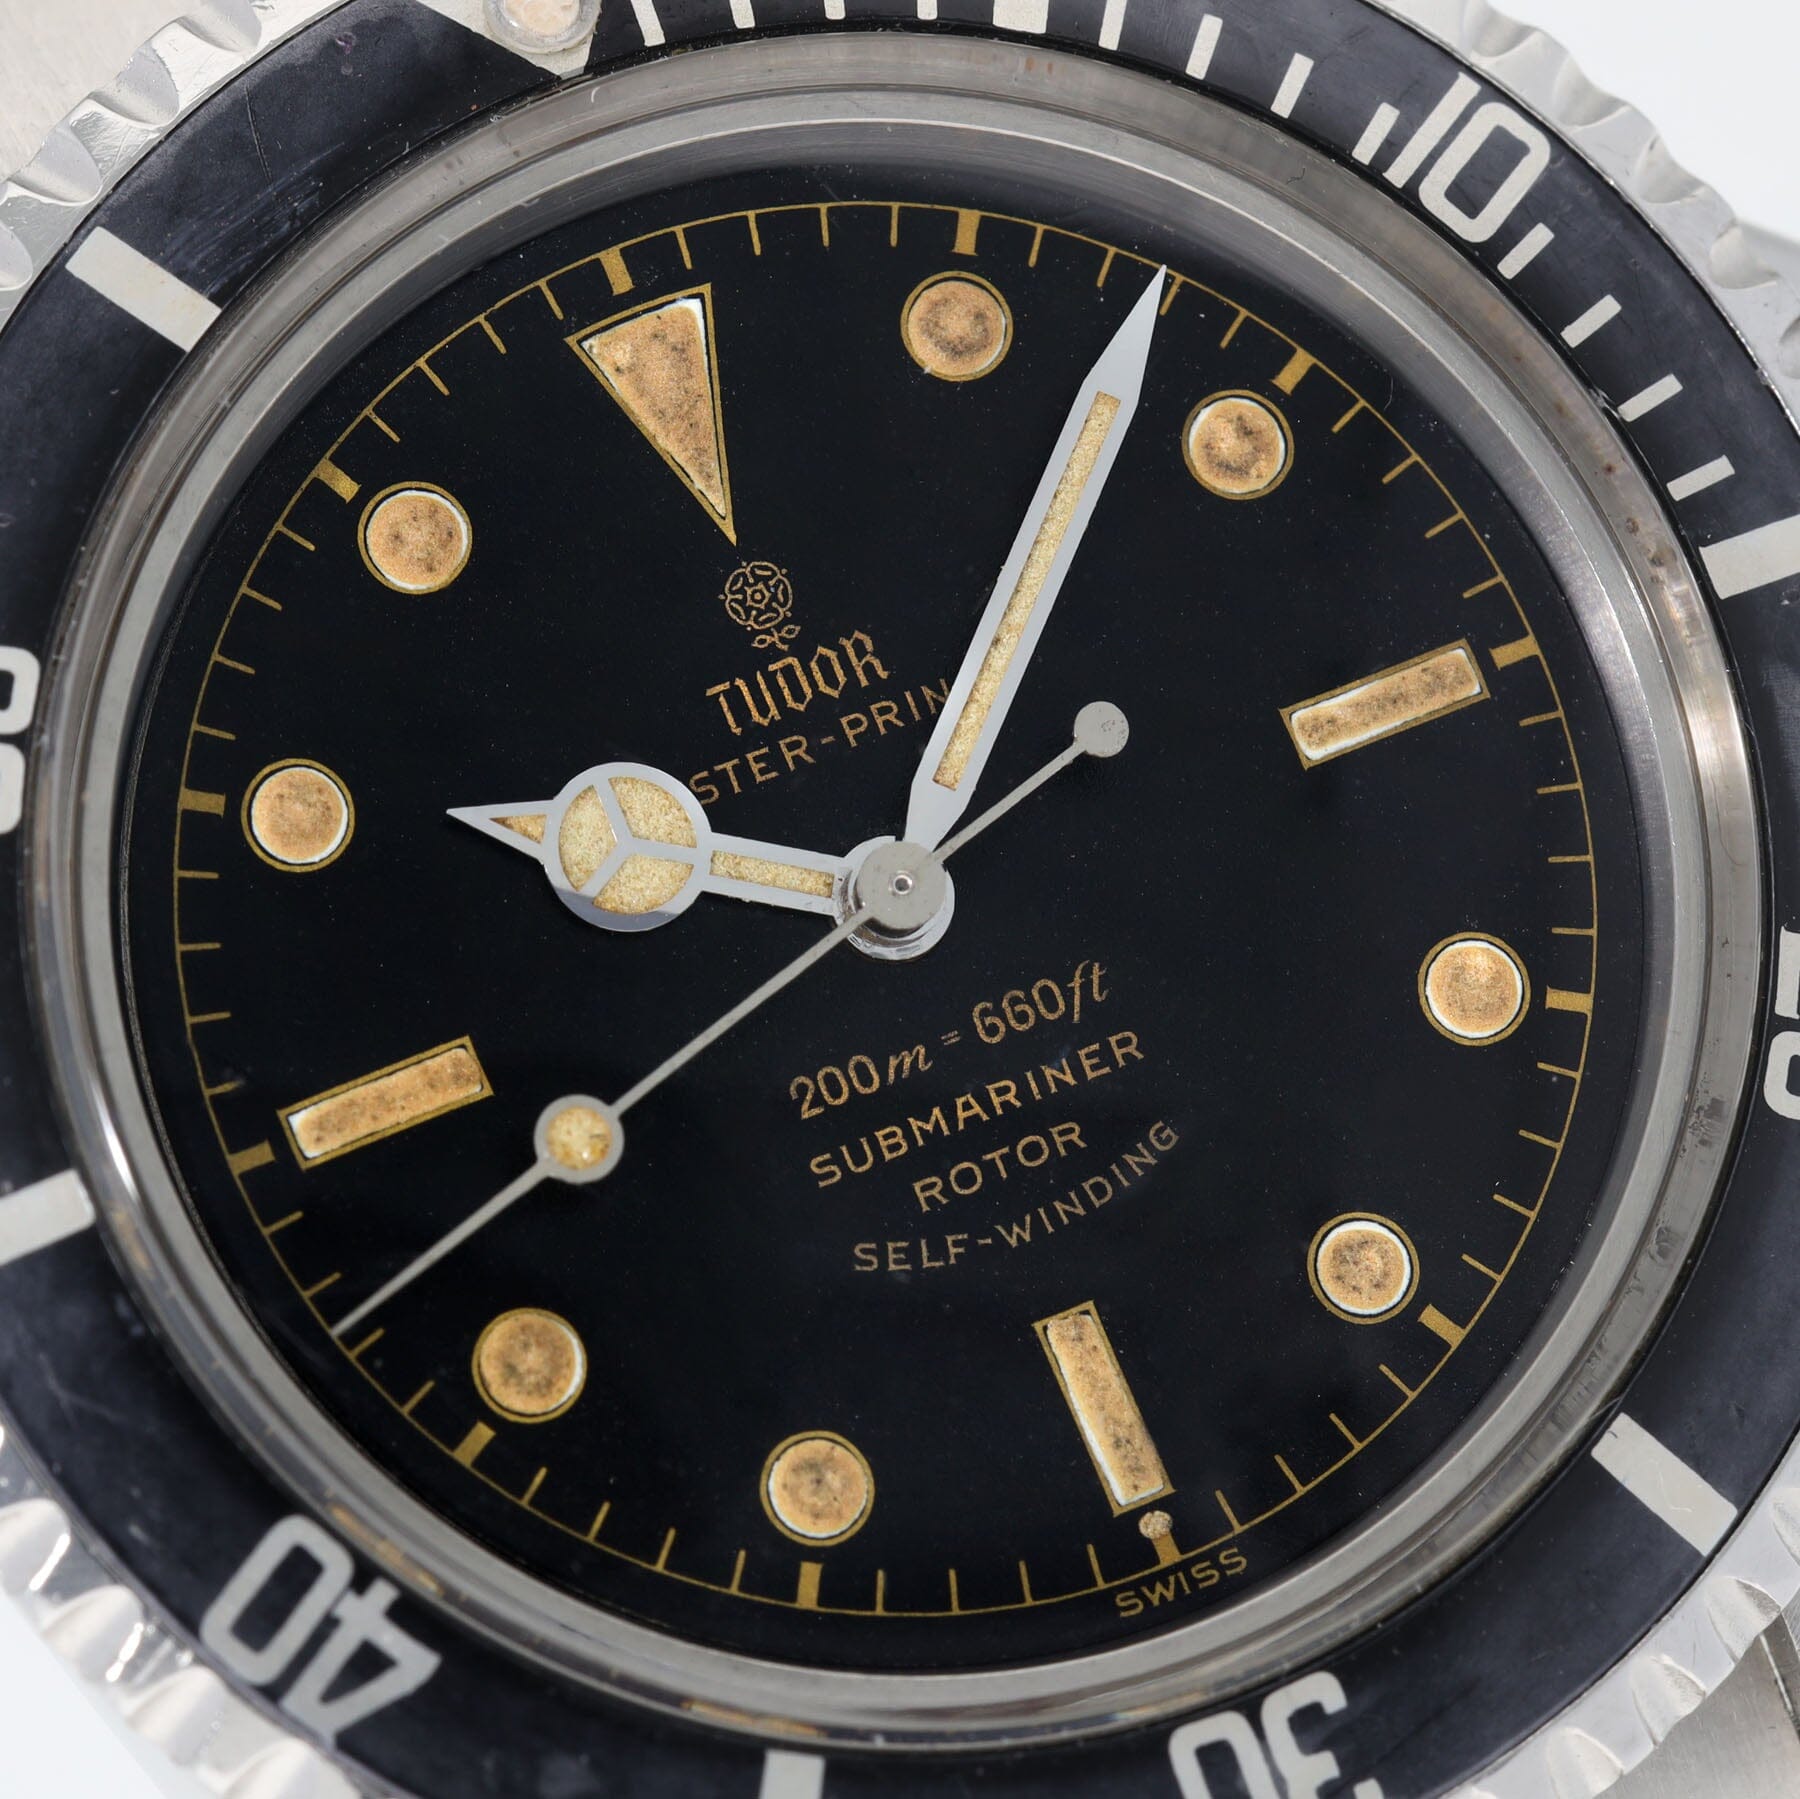 Tudor Submariner ref 7928 exclamation mark Chaptering dial PCG case